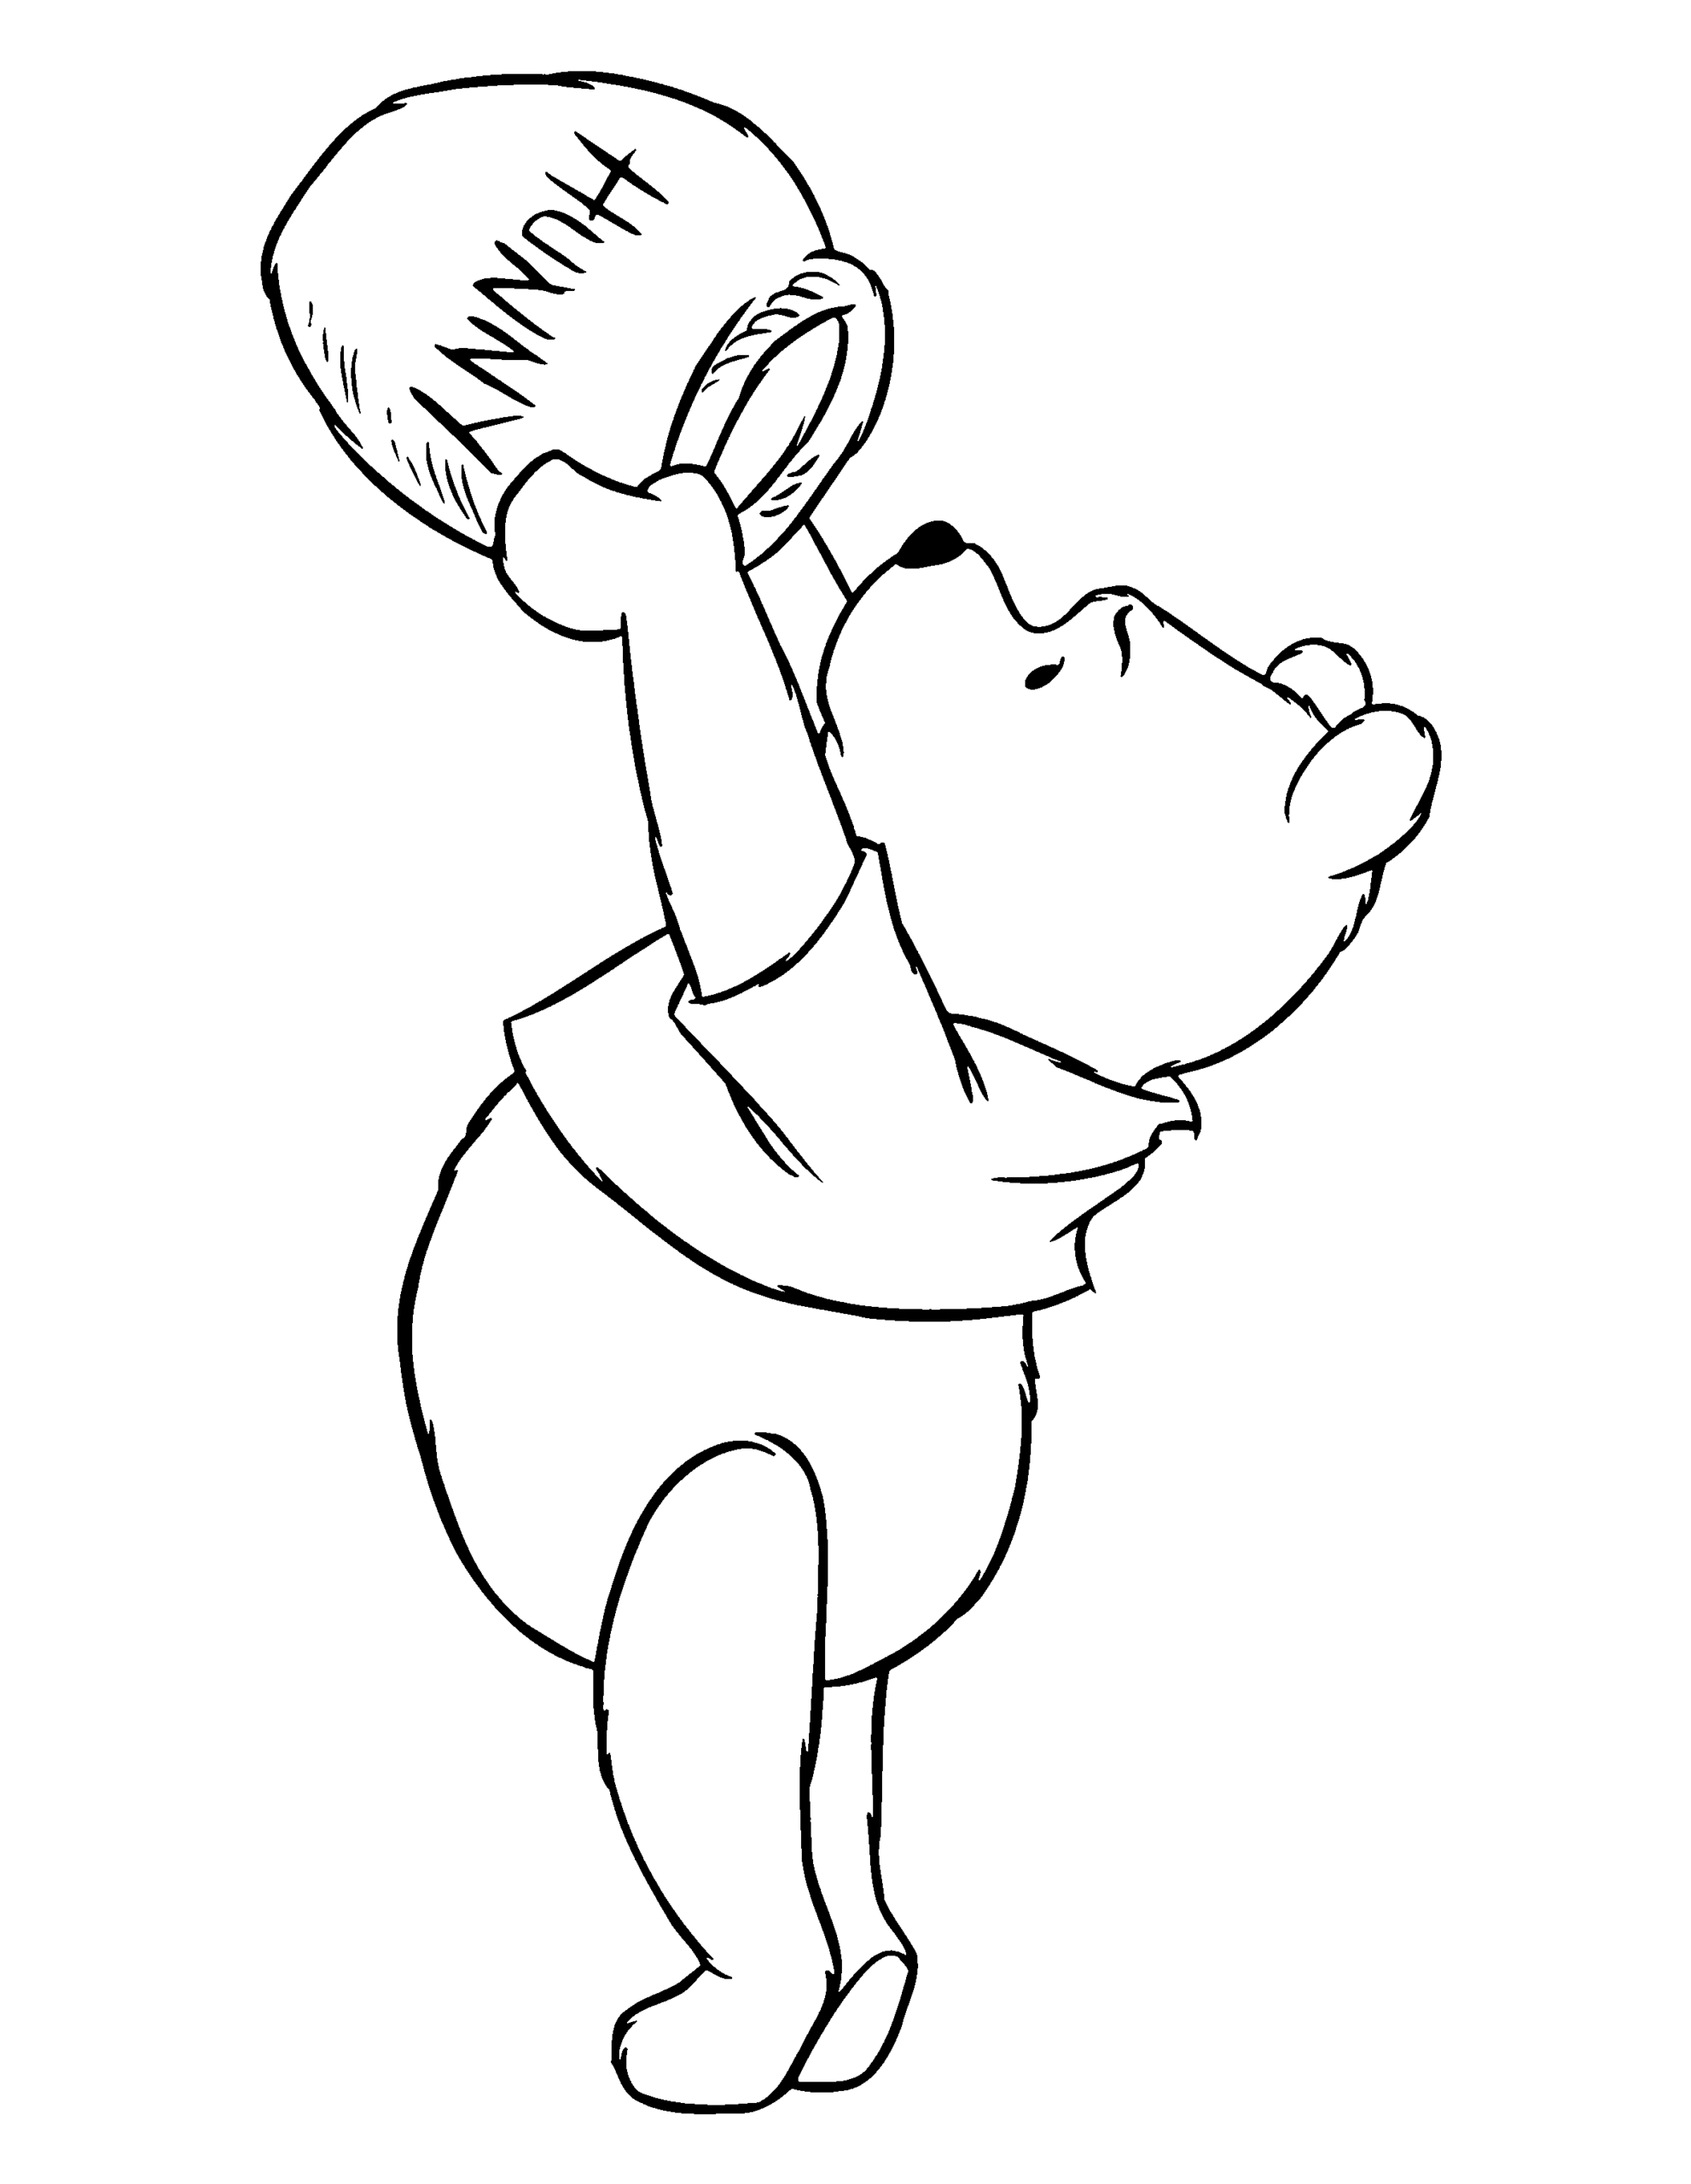 Winnie the Pooh Coloring Pages Cartoons winnie the pooh 56 Printable 2020 7170 Coloring4free